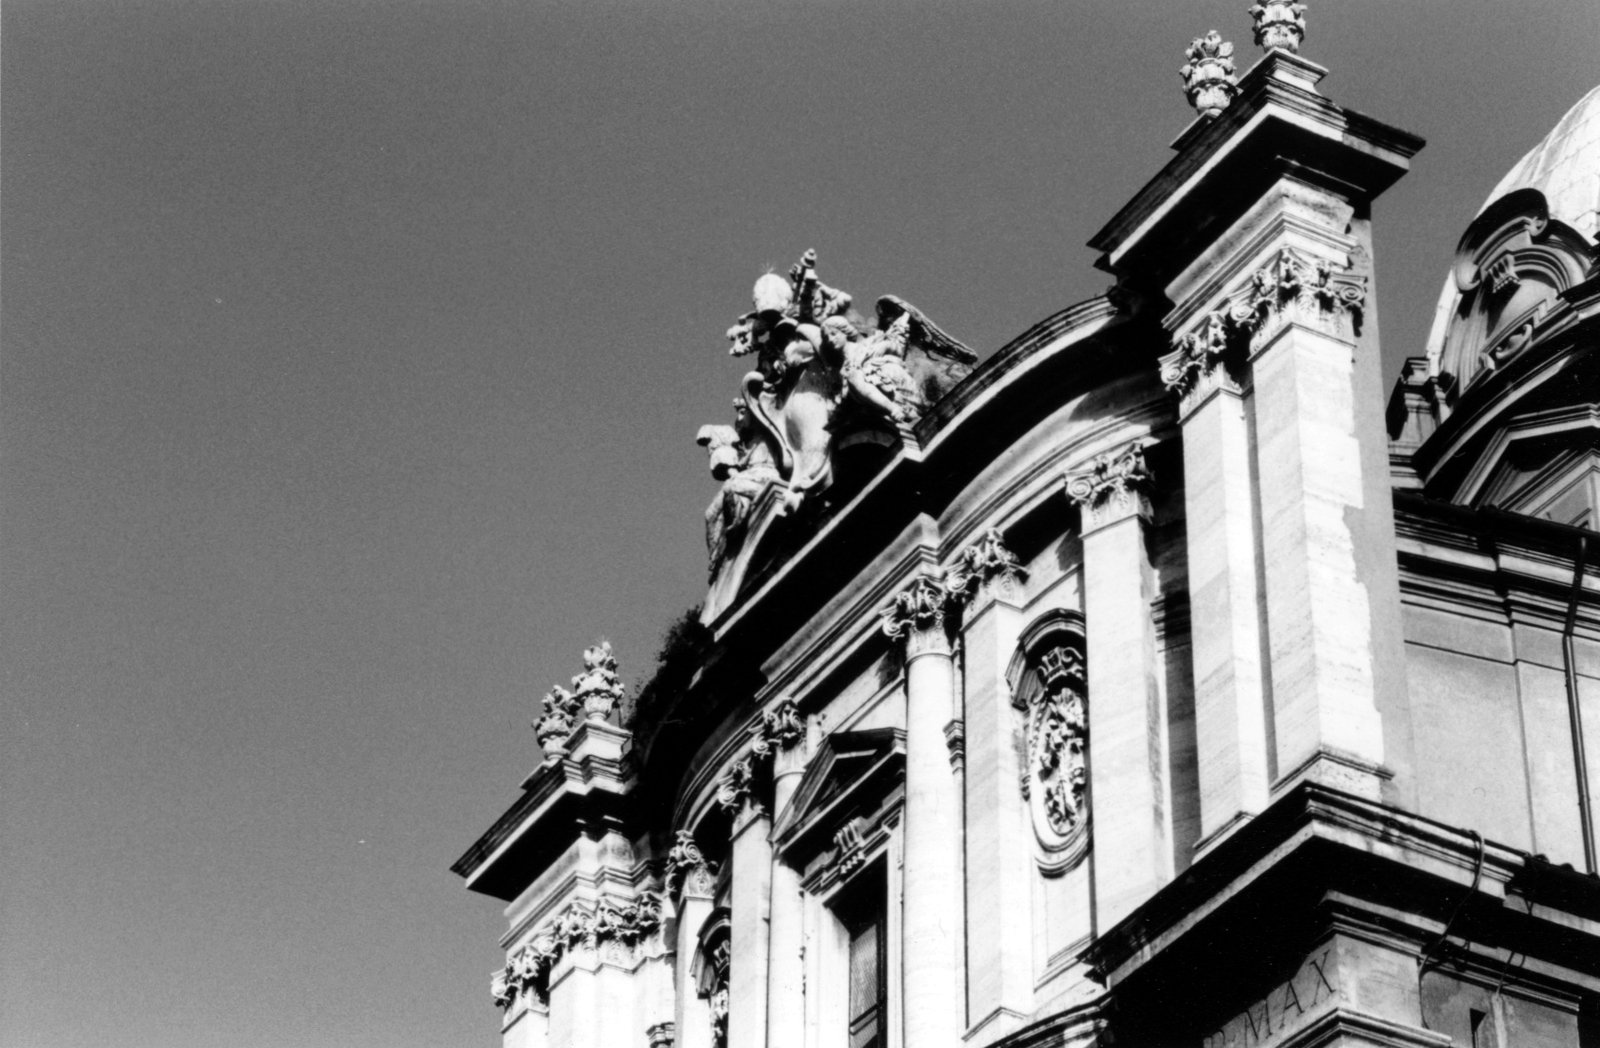 black and white pograph of ornate architecture on side of building